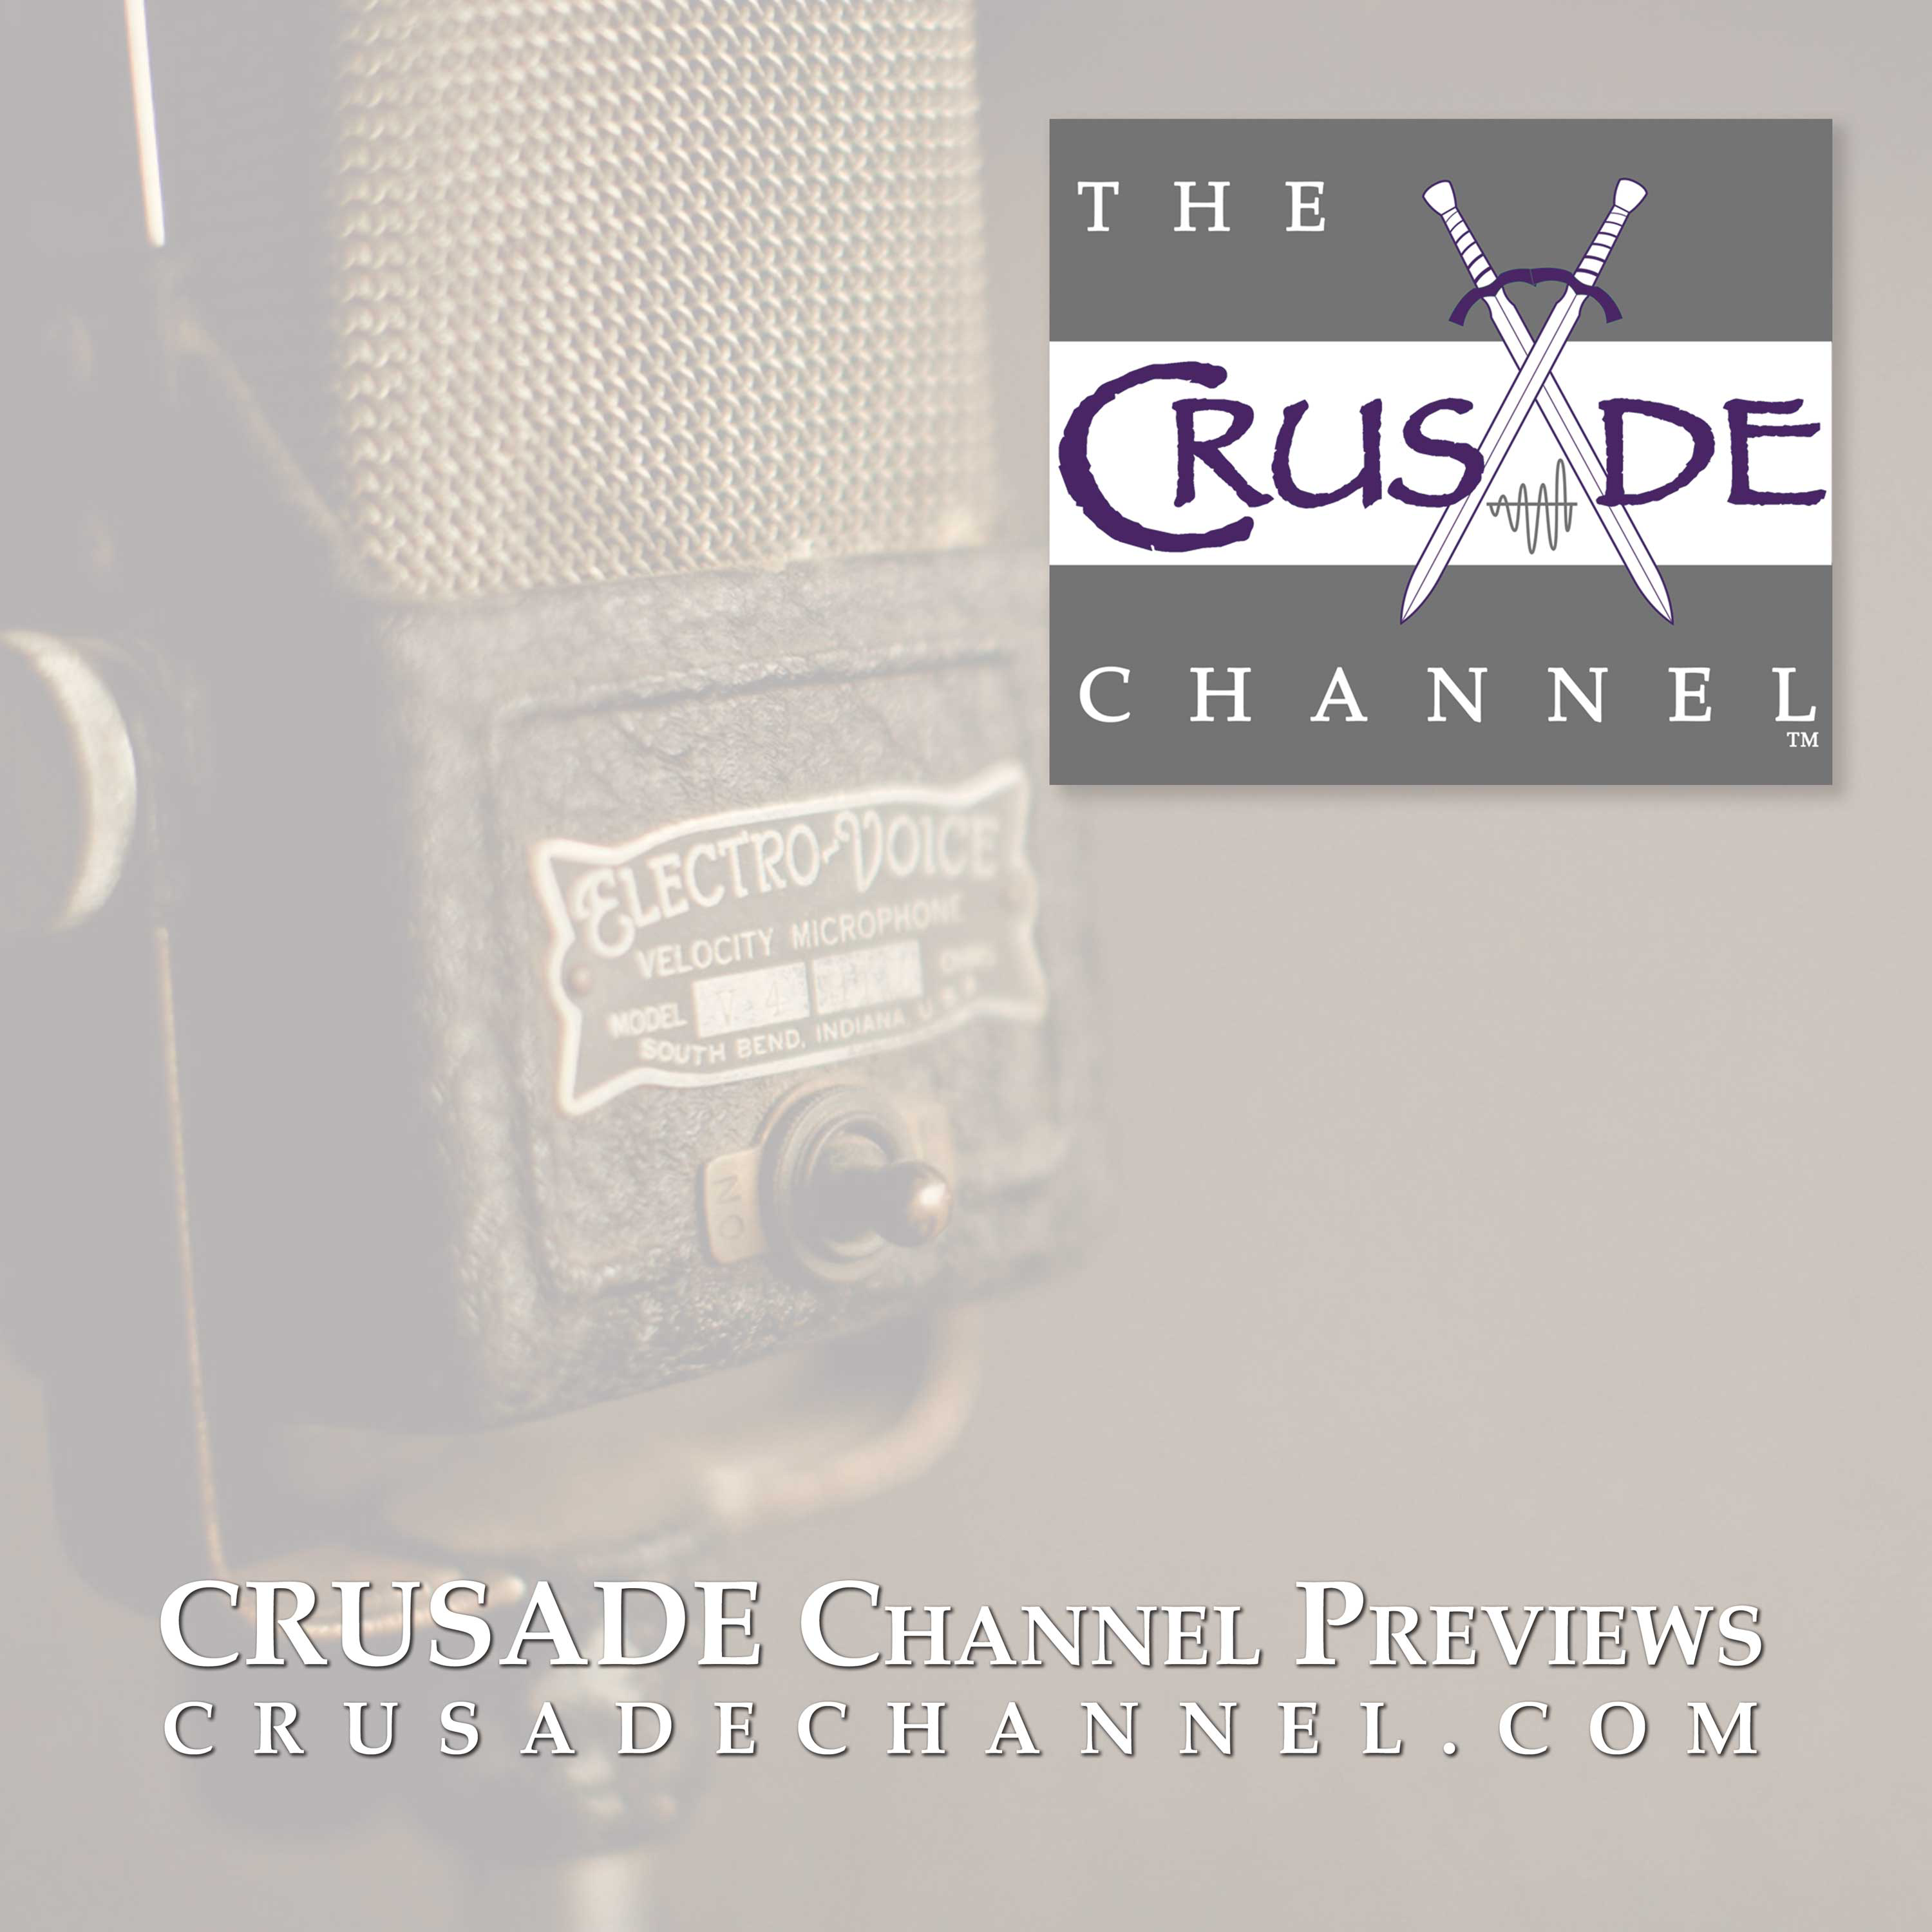 A highlight from The CRUSADE Channel Newscast For October 29th 2021